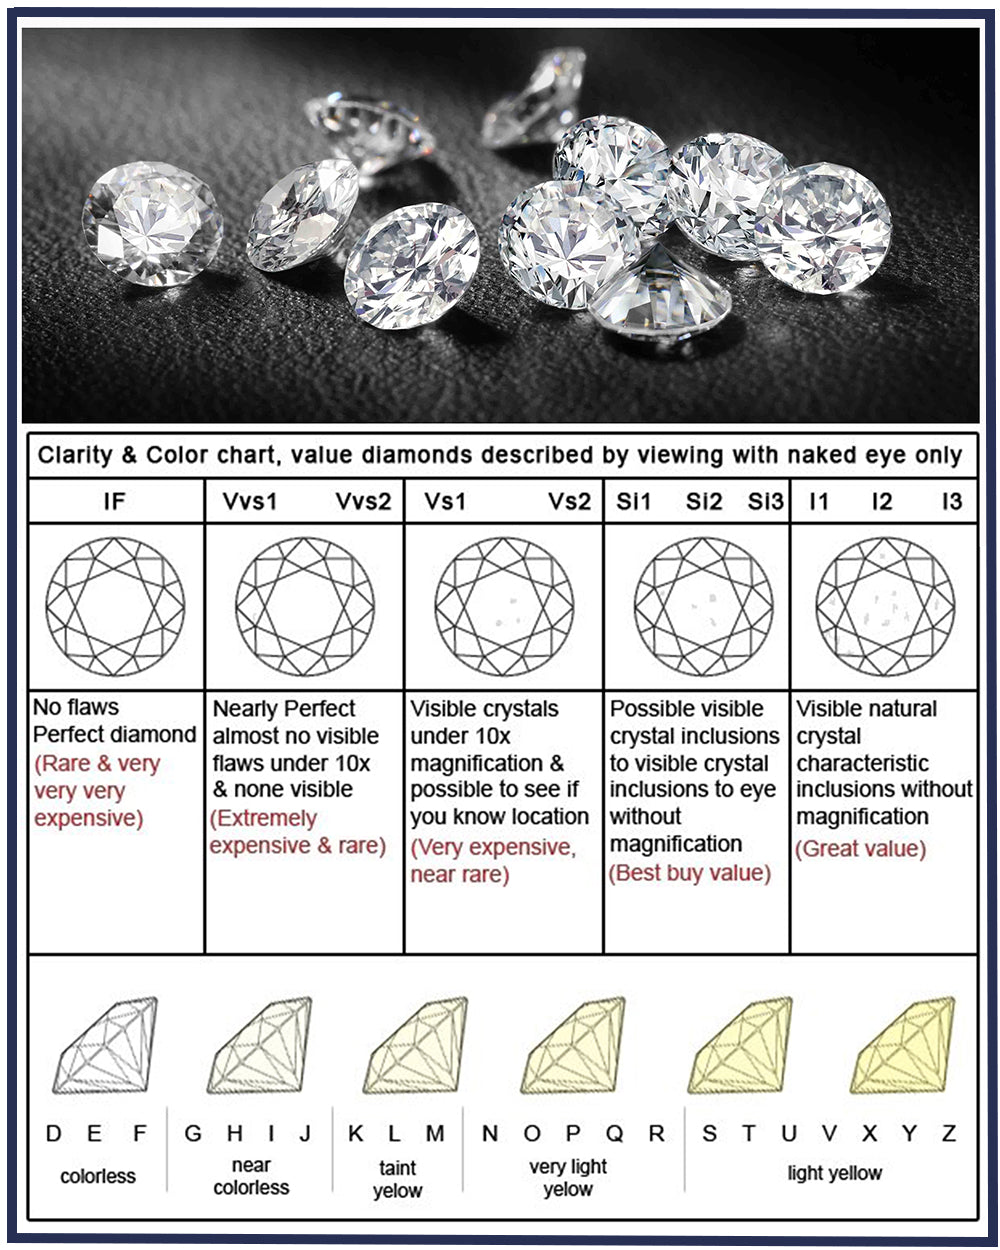 What is A Diamond Clarity Chart?